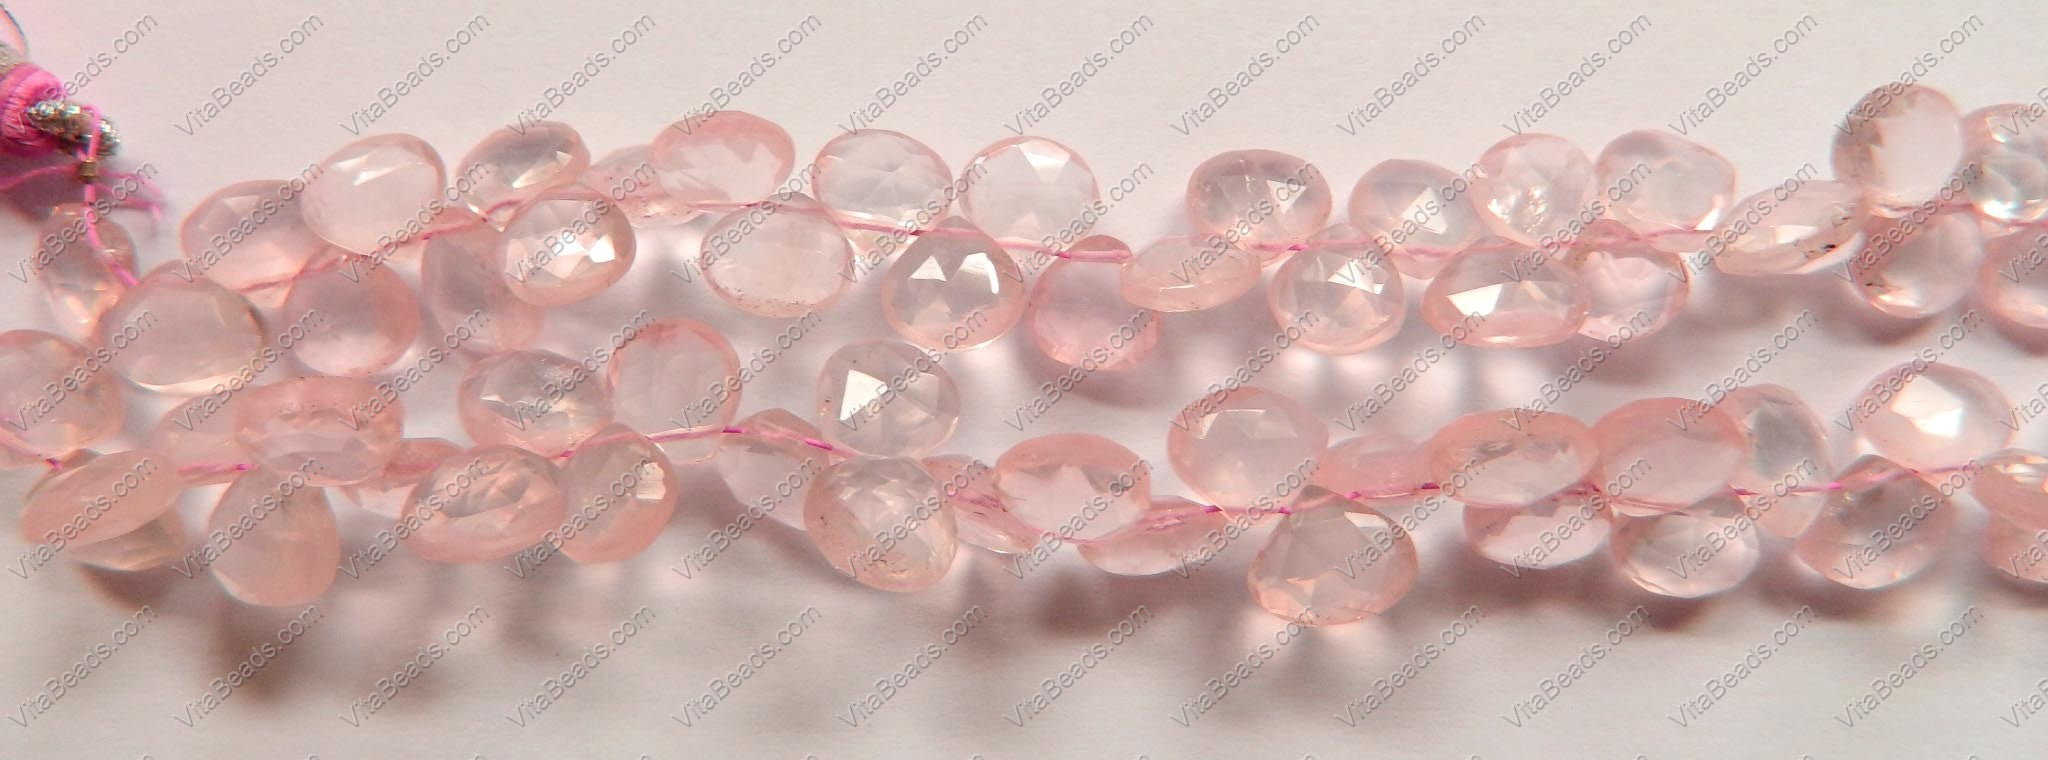 Rose Quartz AAA  -  Faceted Flat Briolette, Faceted Heart Side-drill  6"